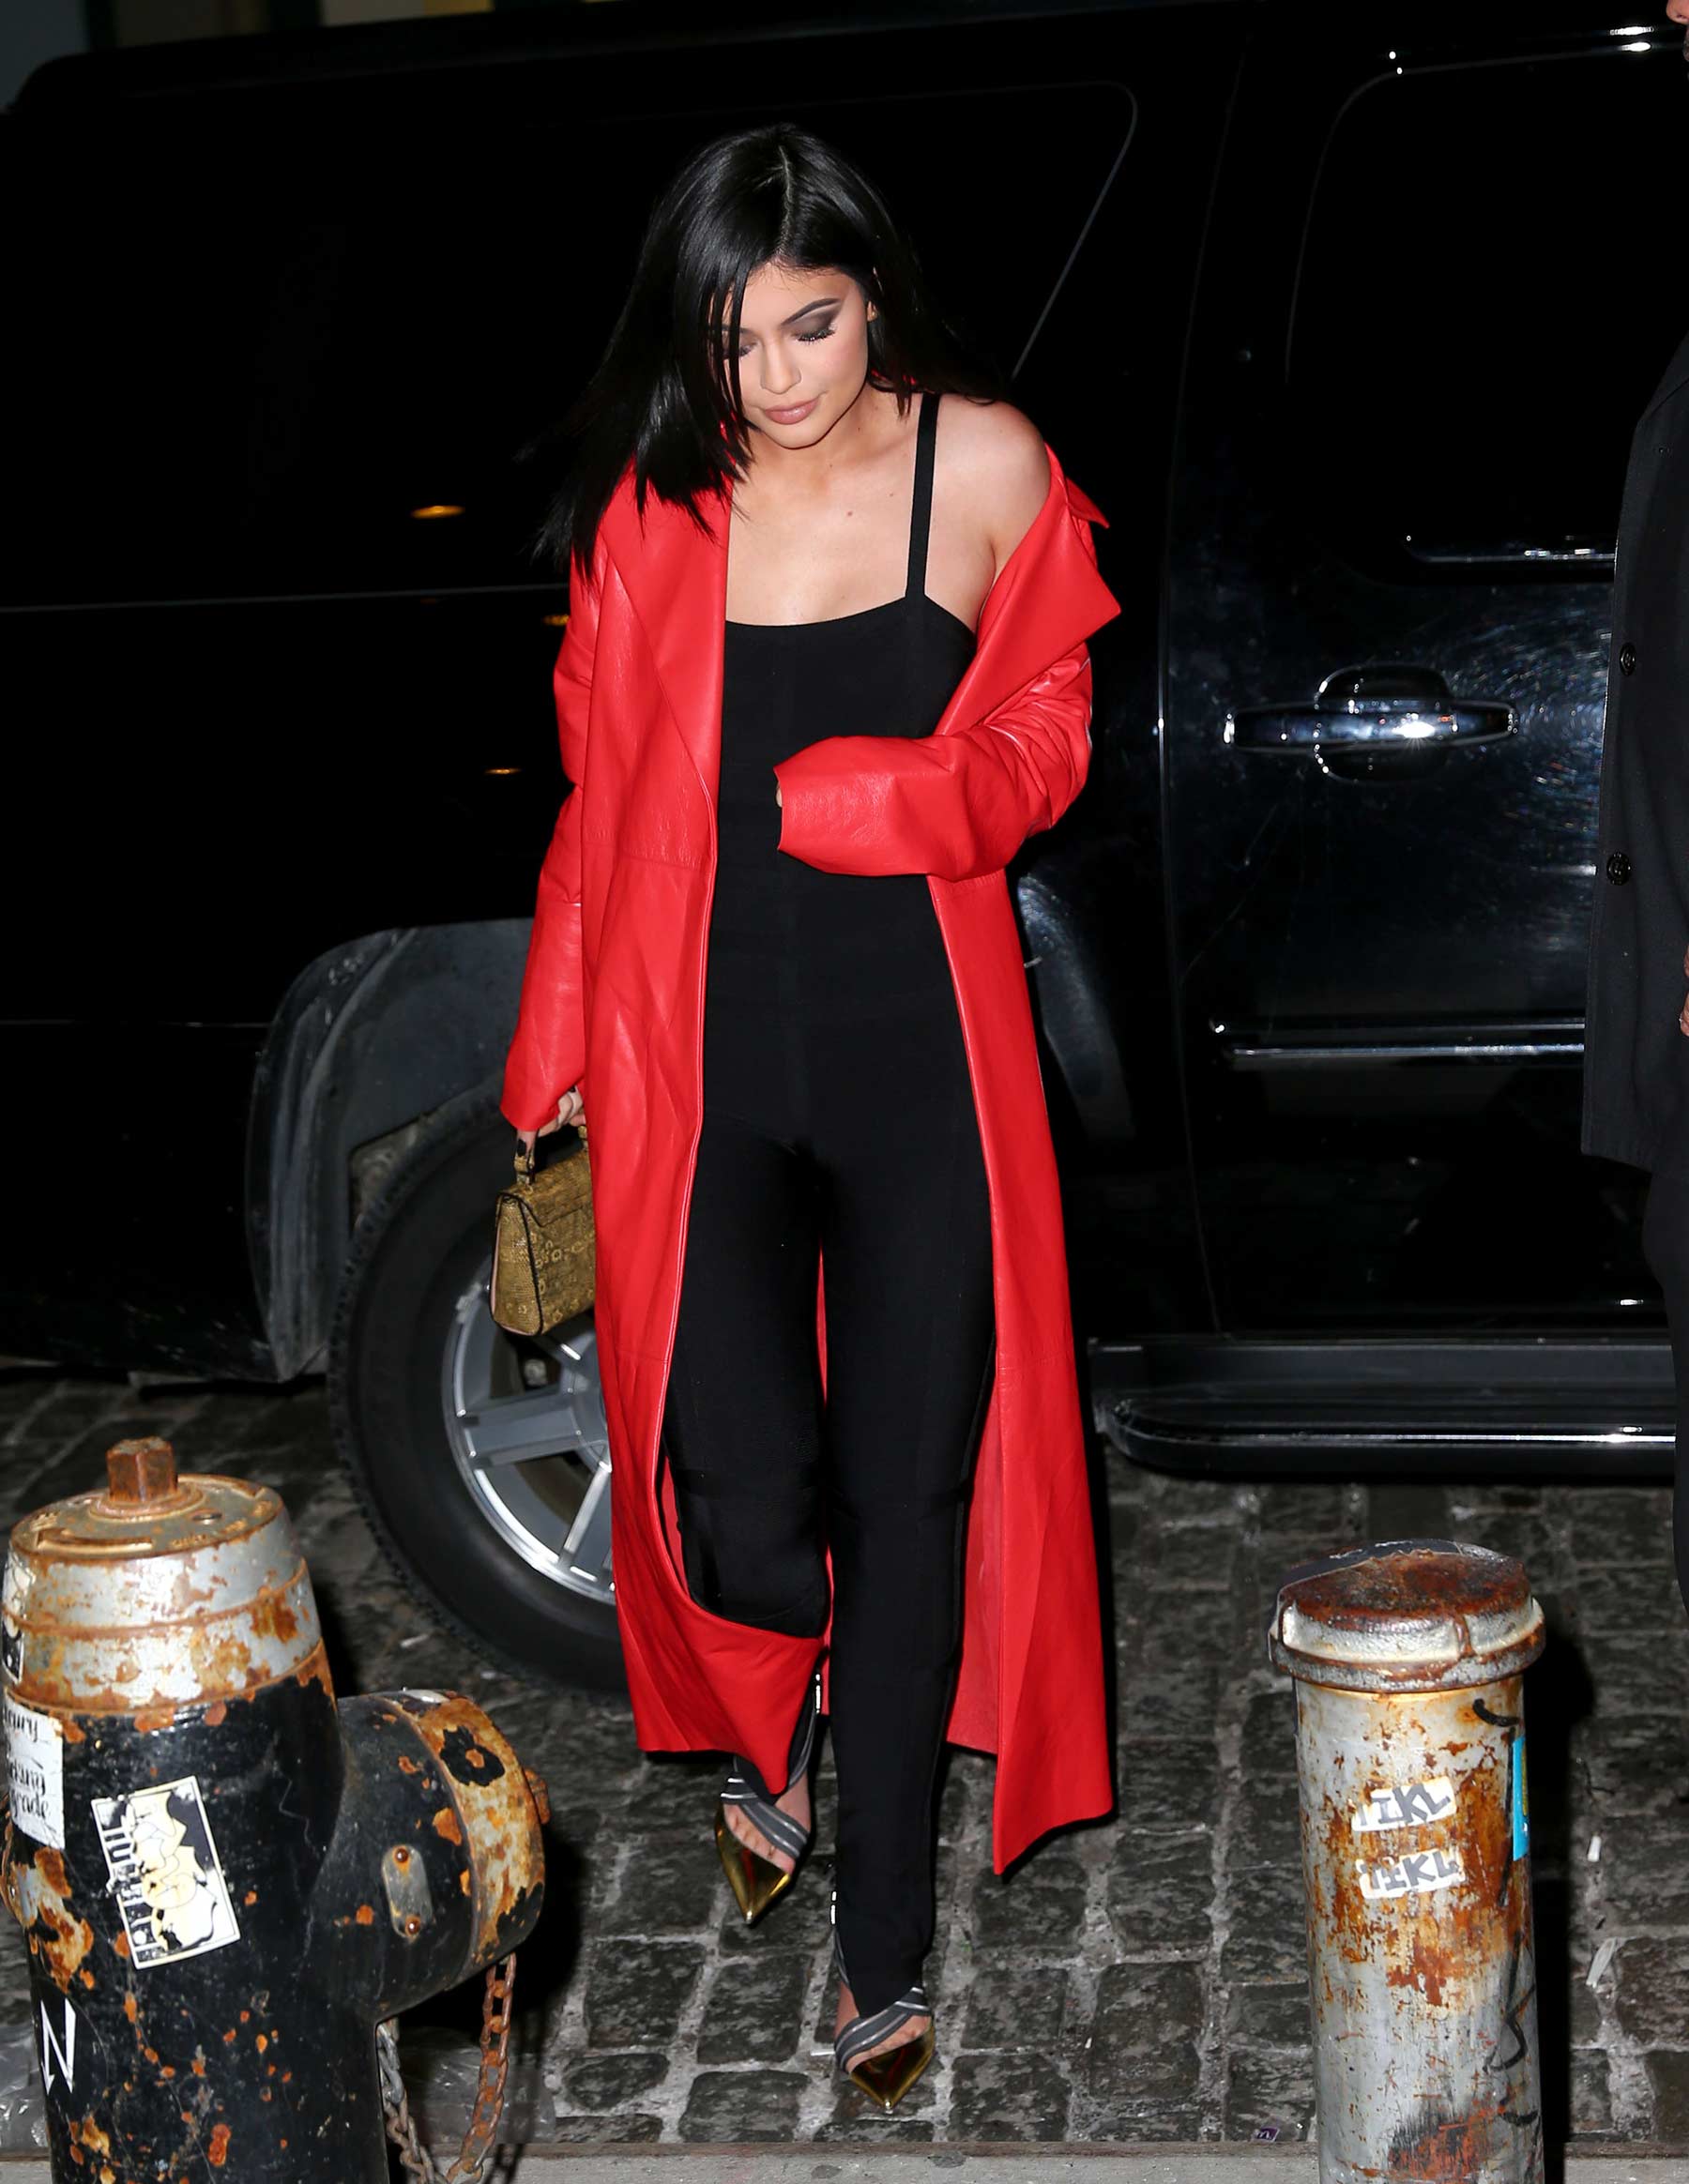 Kylie Jenner out & about in NYC